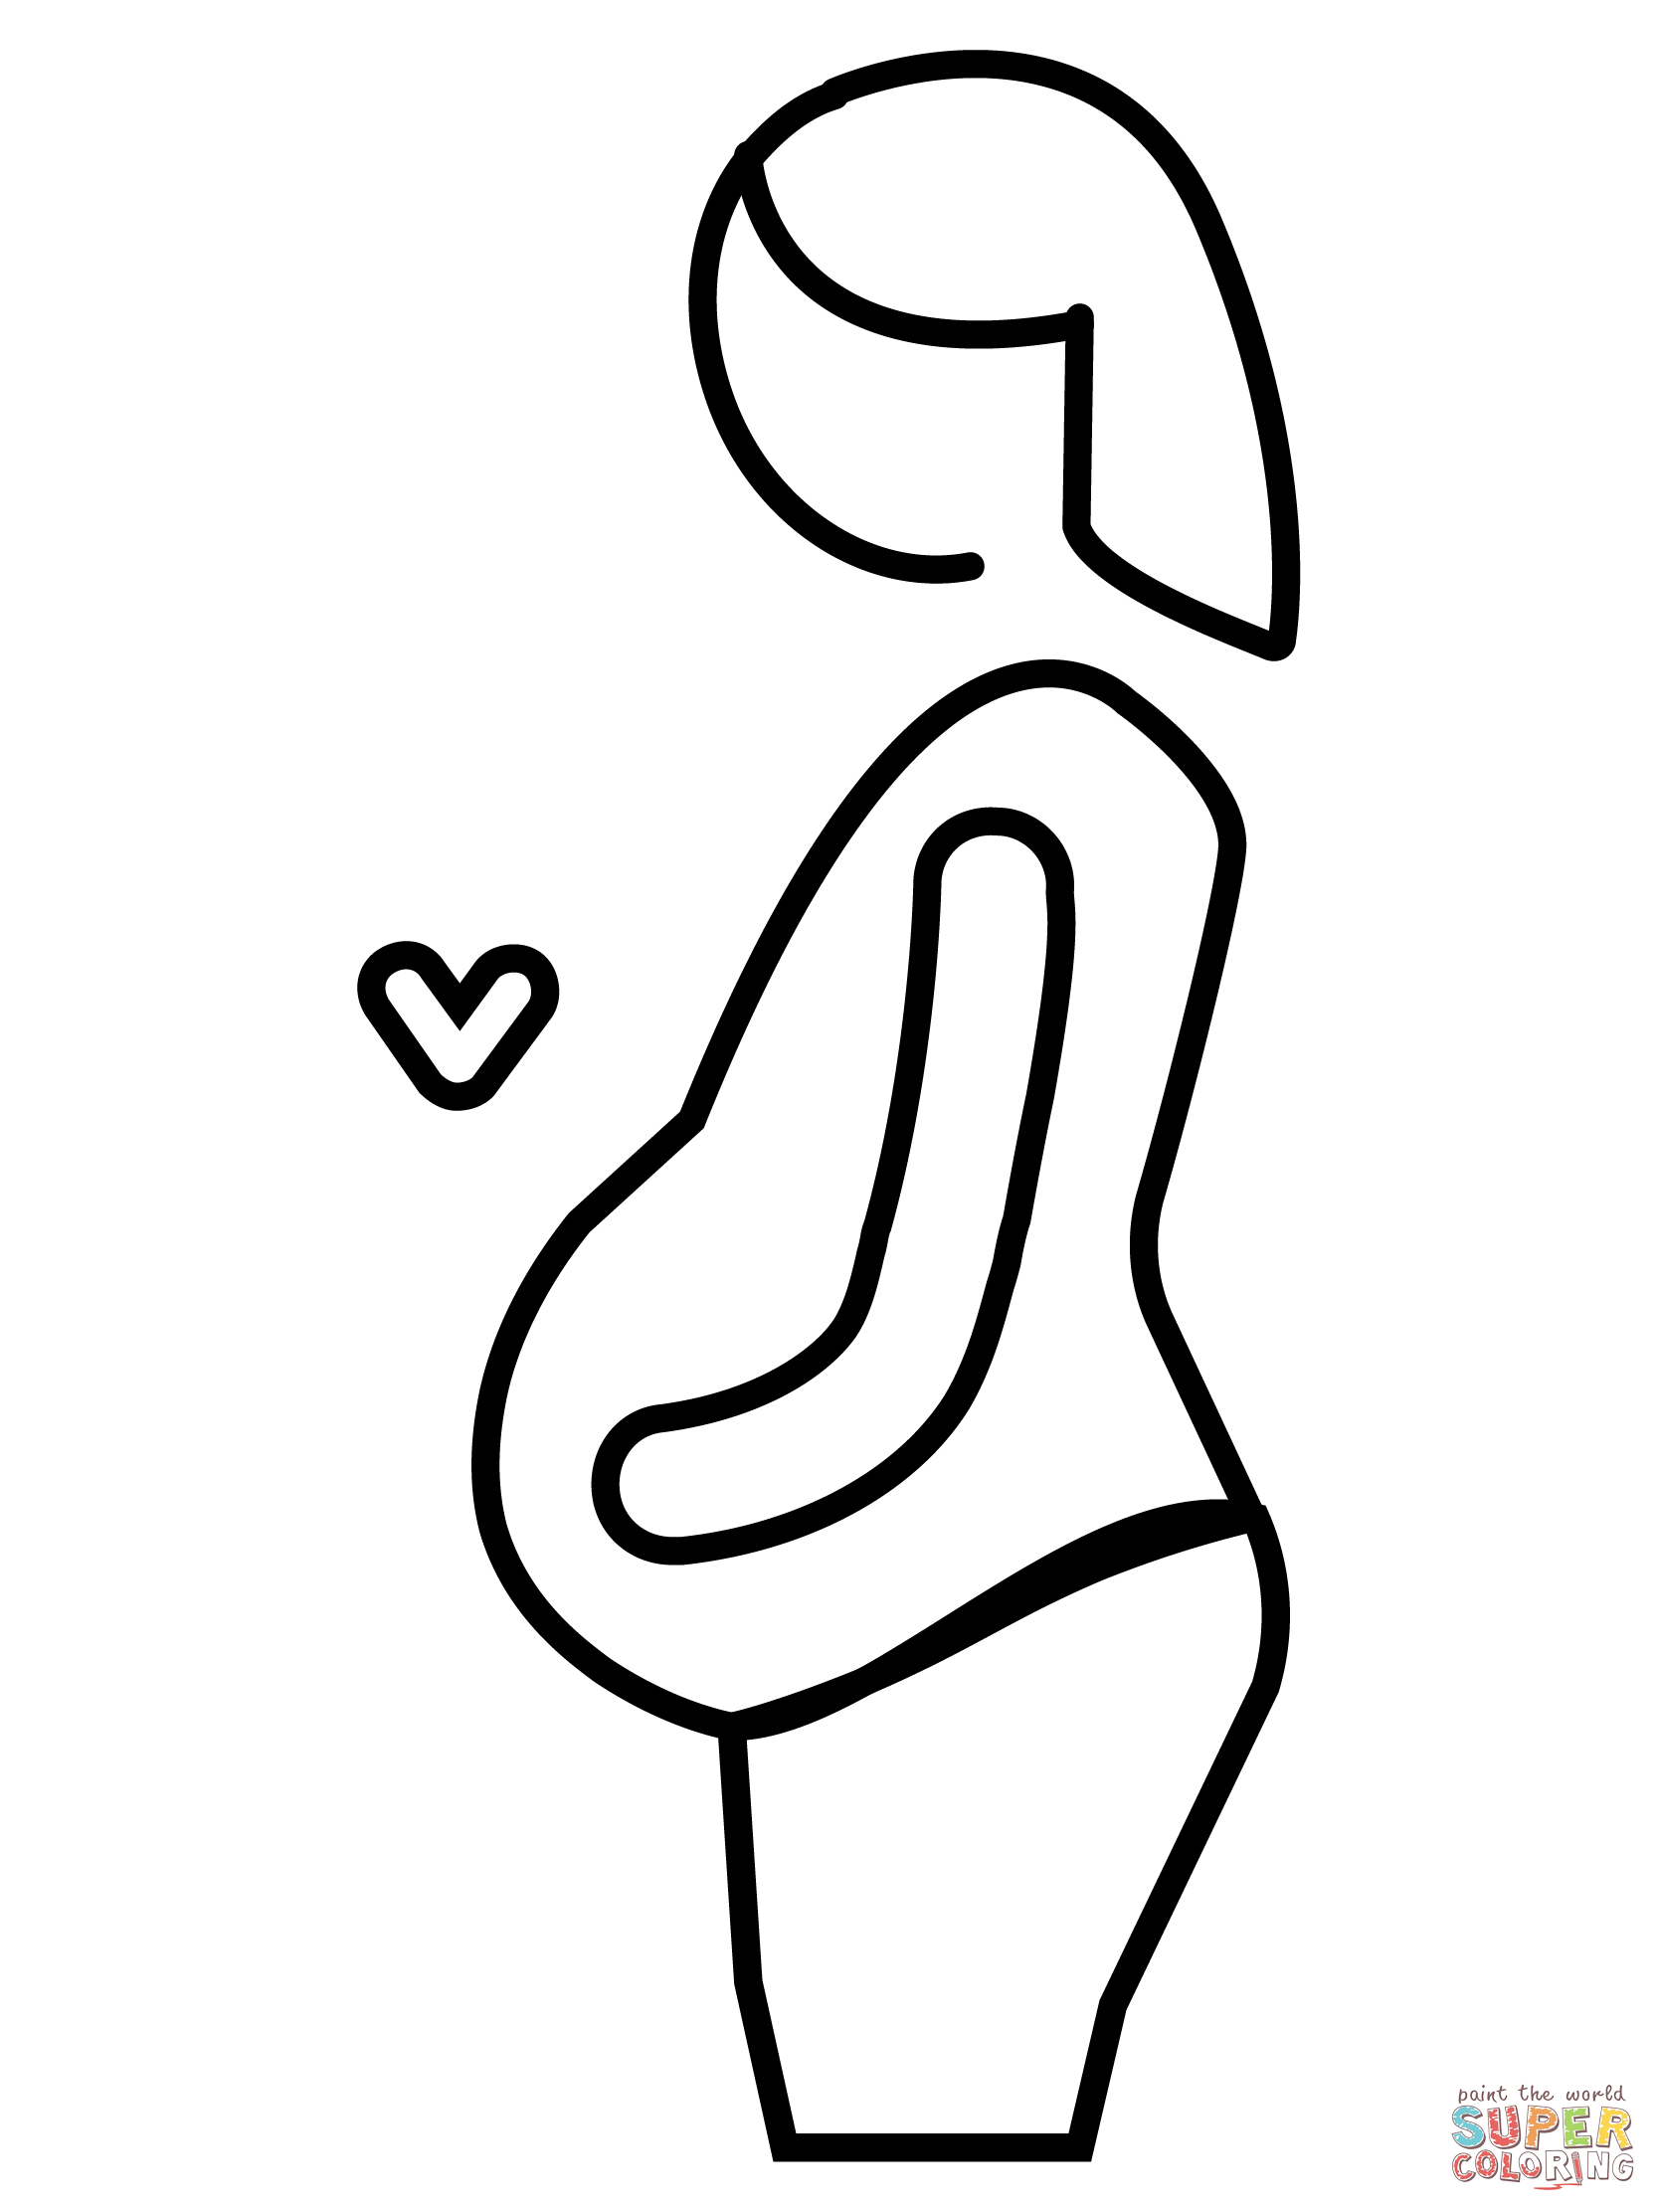 Pregnant woman emoji coloring page free printable coloring pages